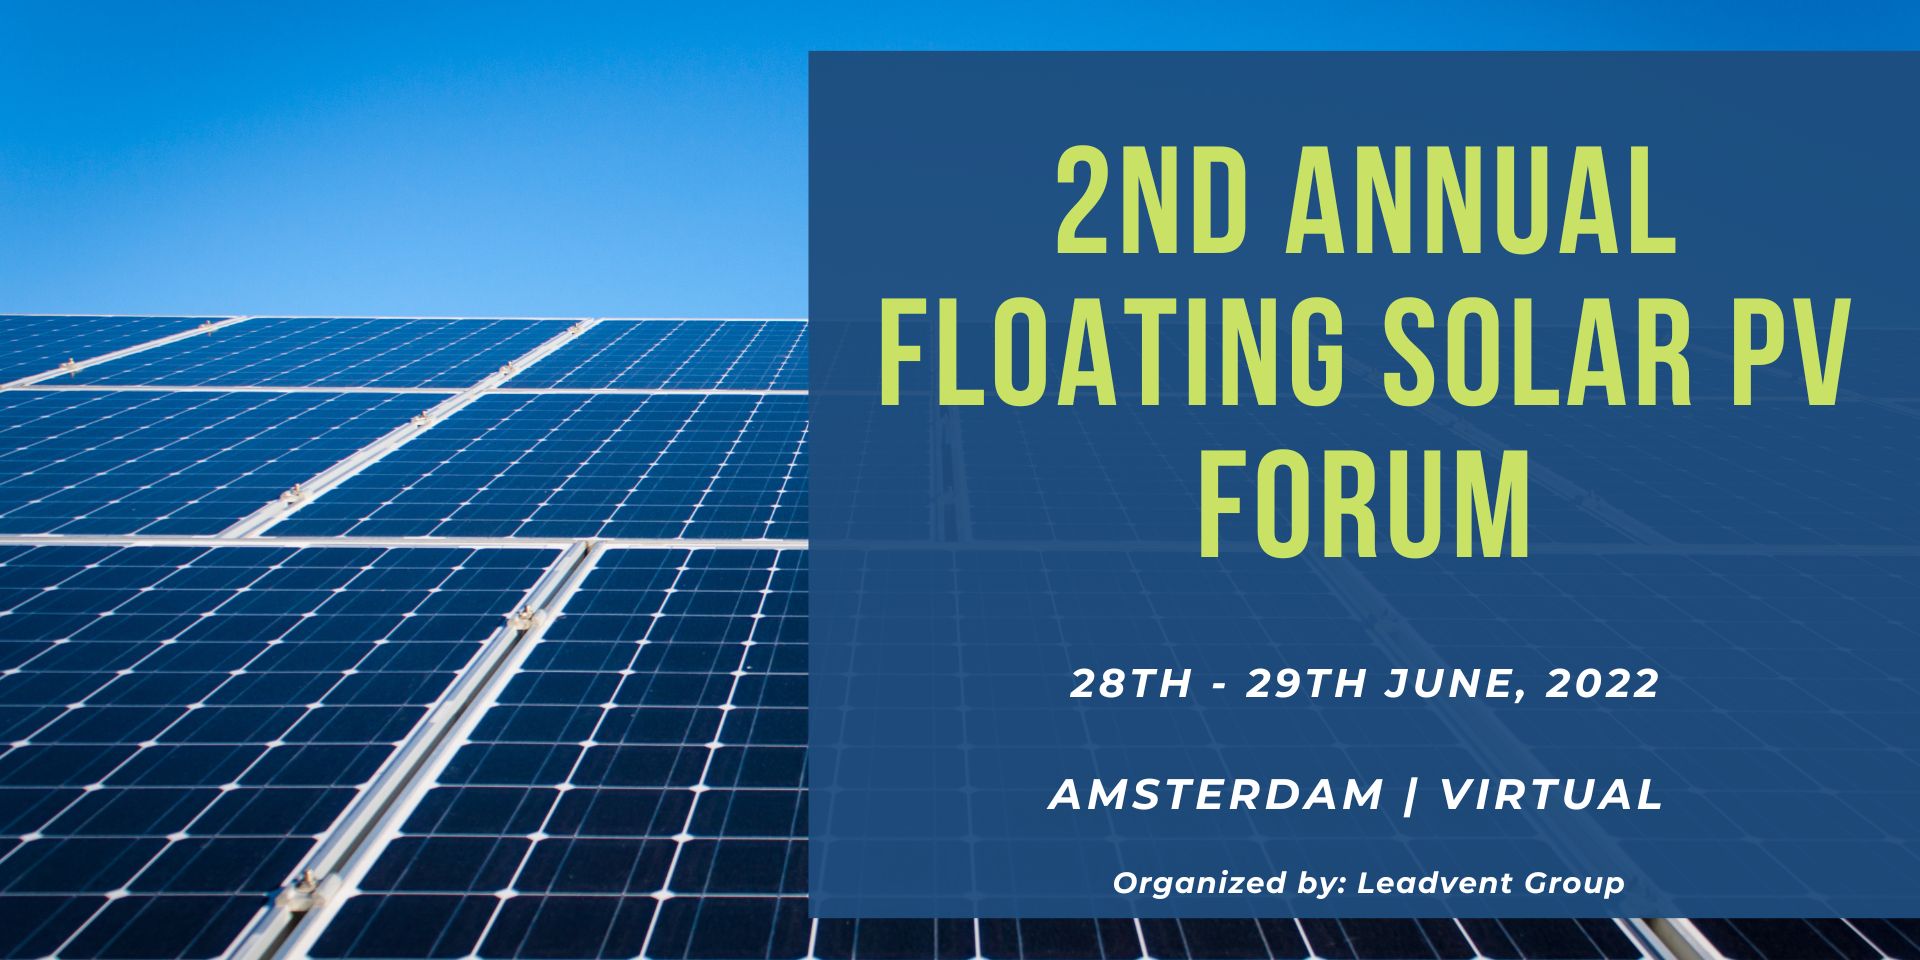 2nd Annual Floating Solar PV Forum organized by Leadvent Group